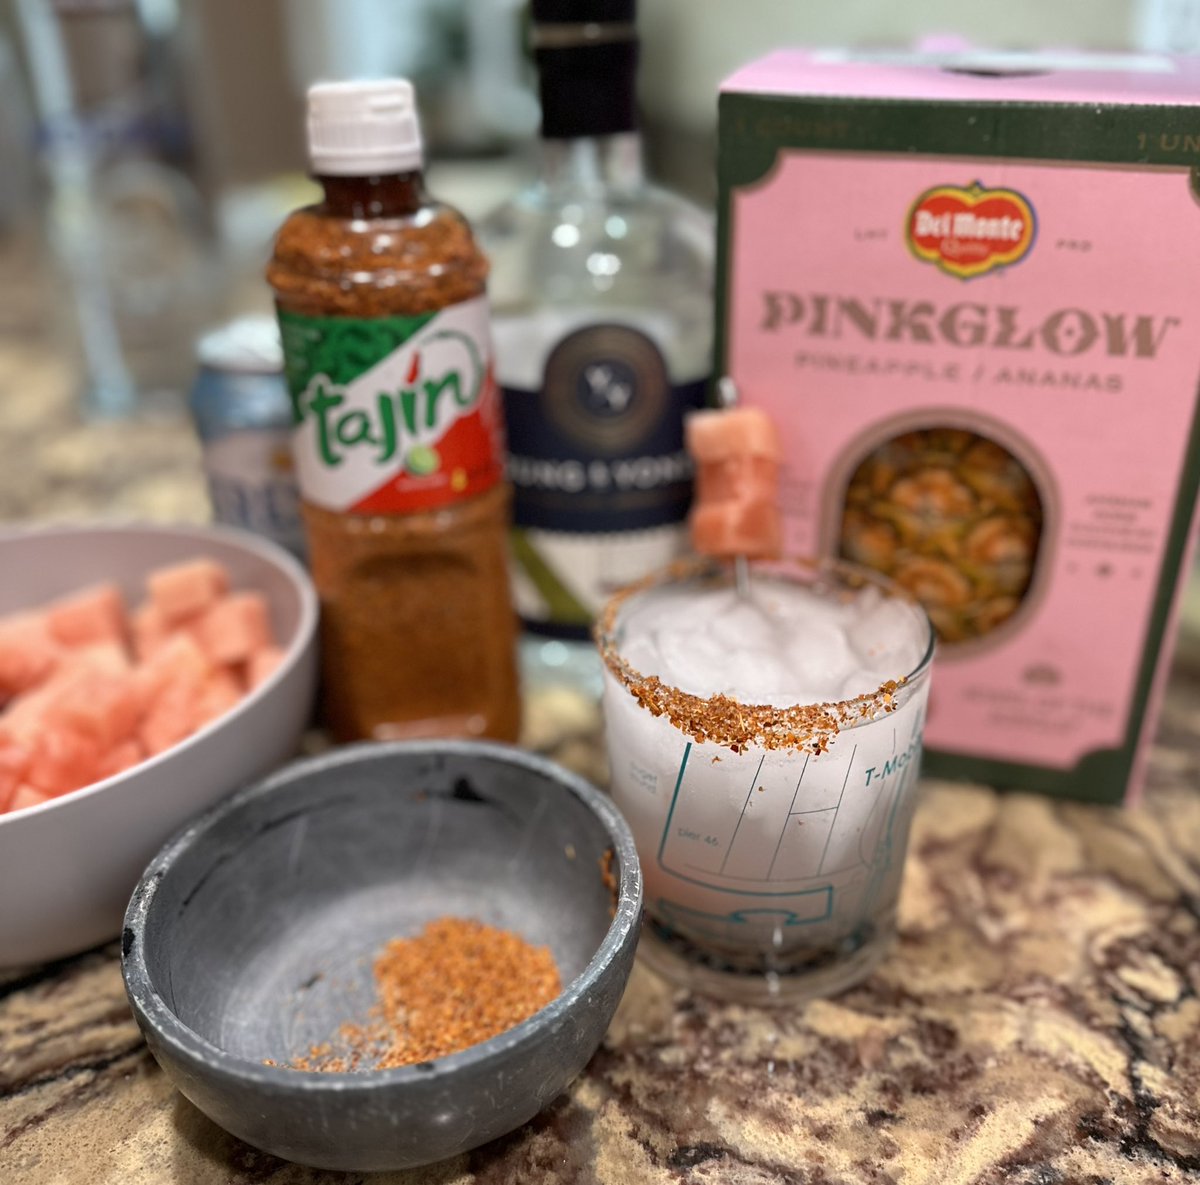 Made a fun little cocktail last evening with some Pinkglow Pineapple, Tajin, Vodka & Fresca - daughter & I enjoyed